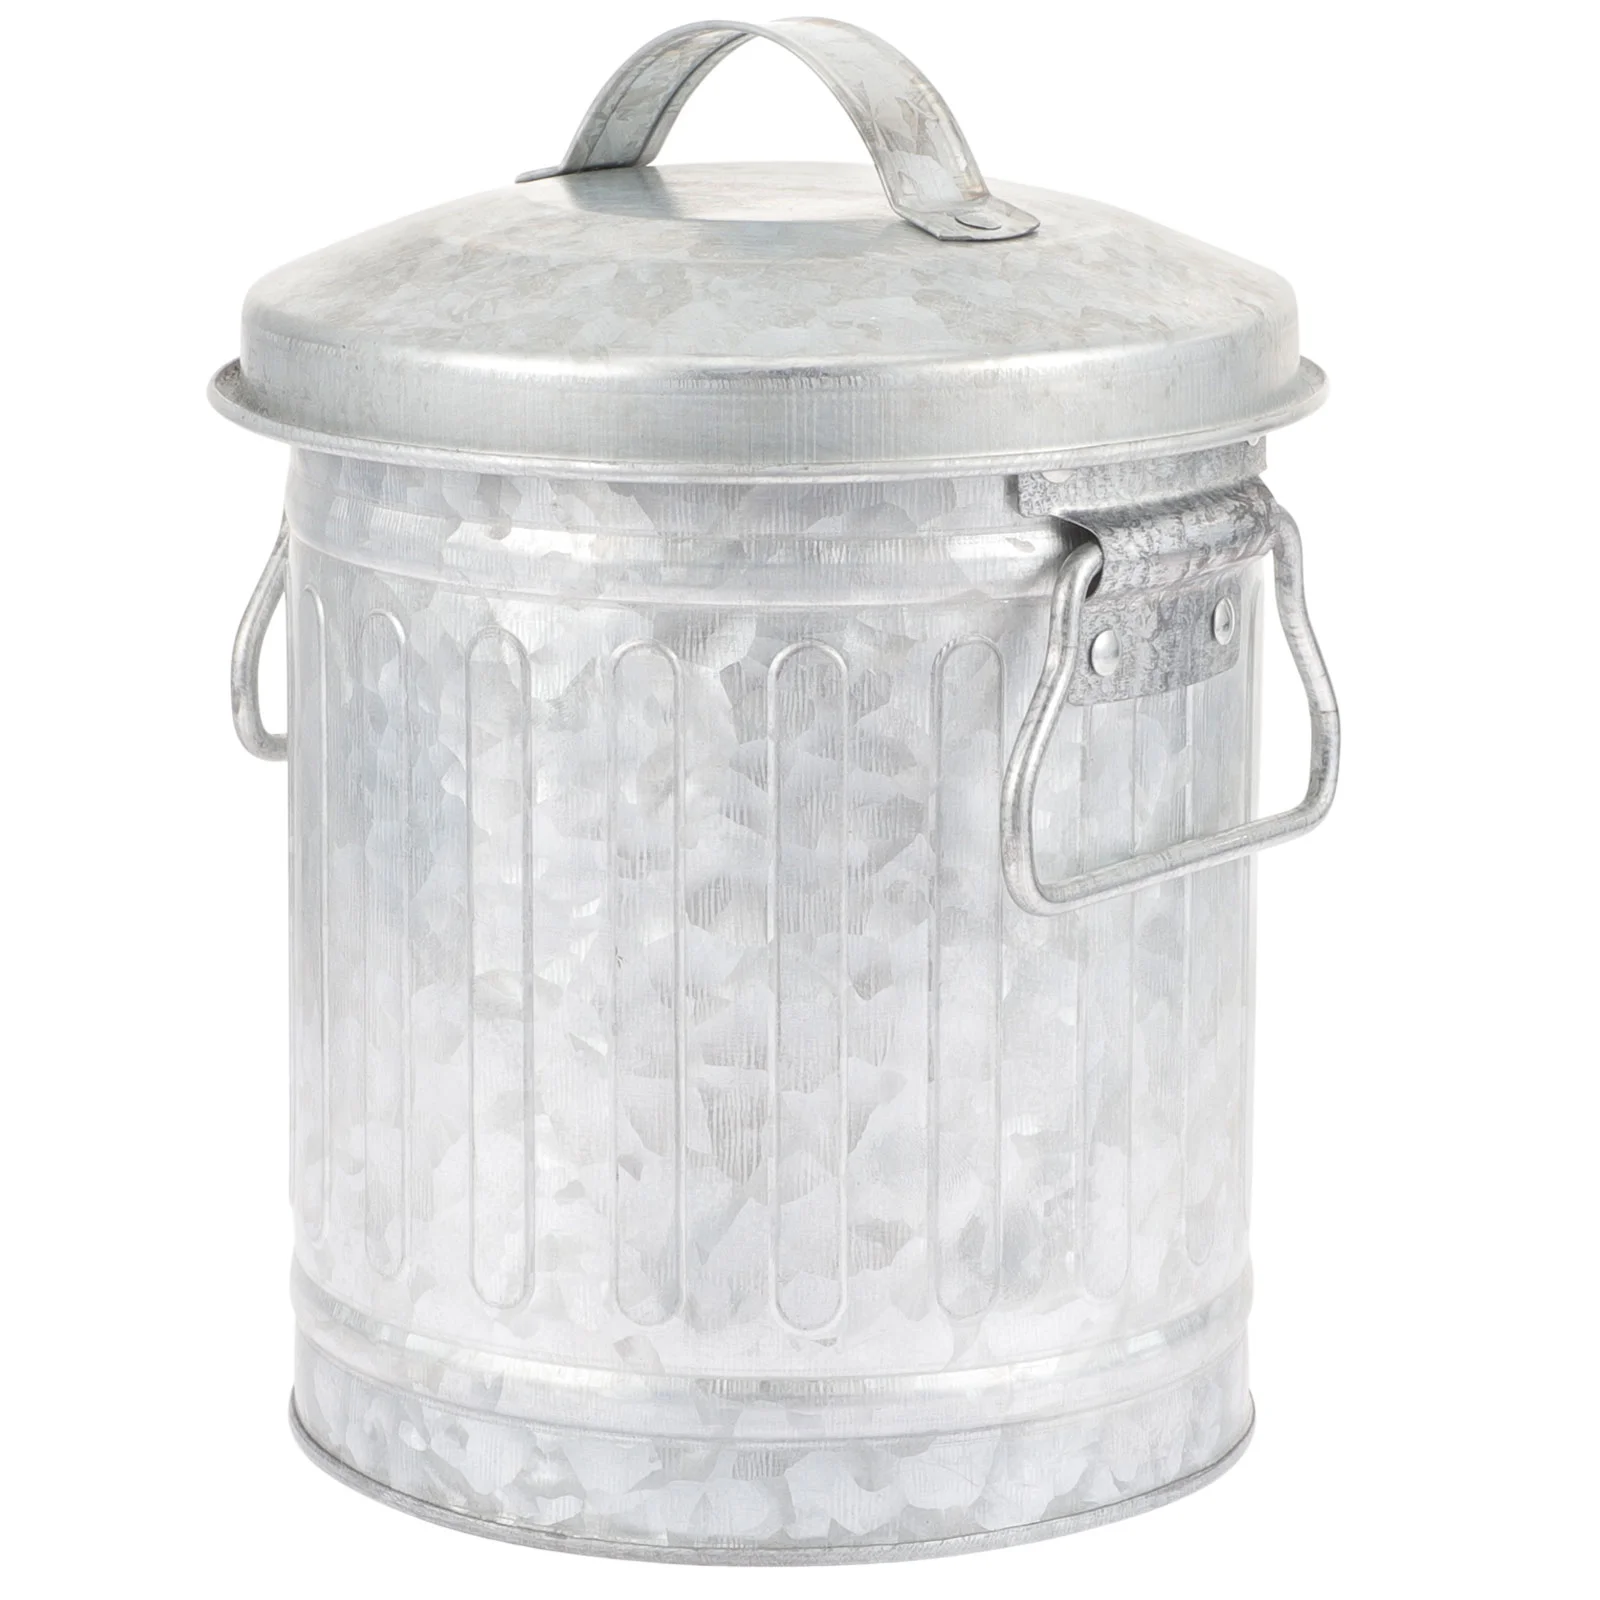 

Possible output: "Ash Bucket Lid Galvanized Iron Metal Fireplace Charcoal Can Coal Small Trash Pen Storage Kitchen Compost Bin